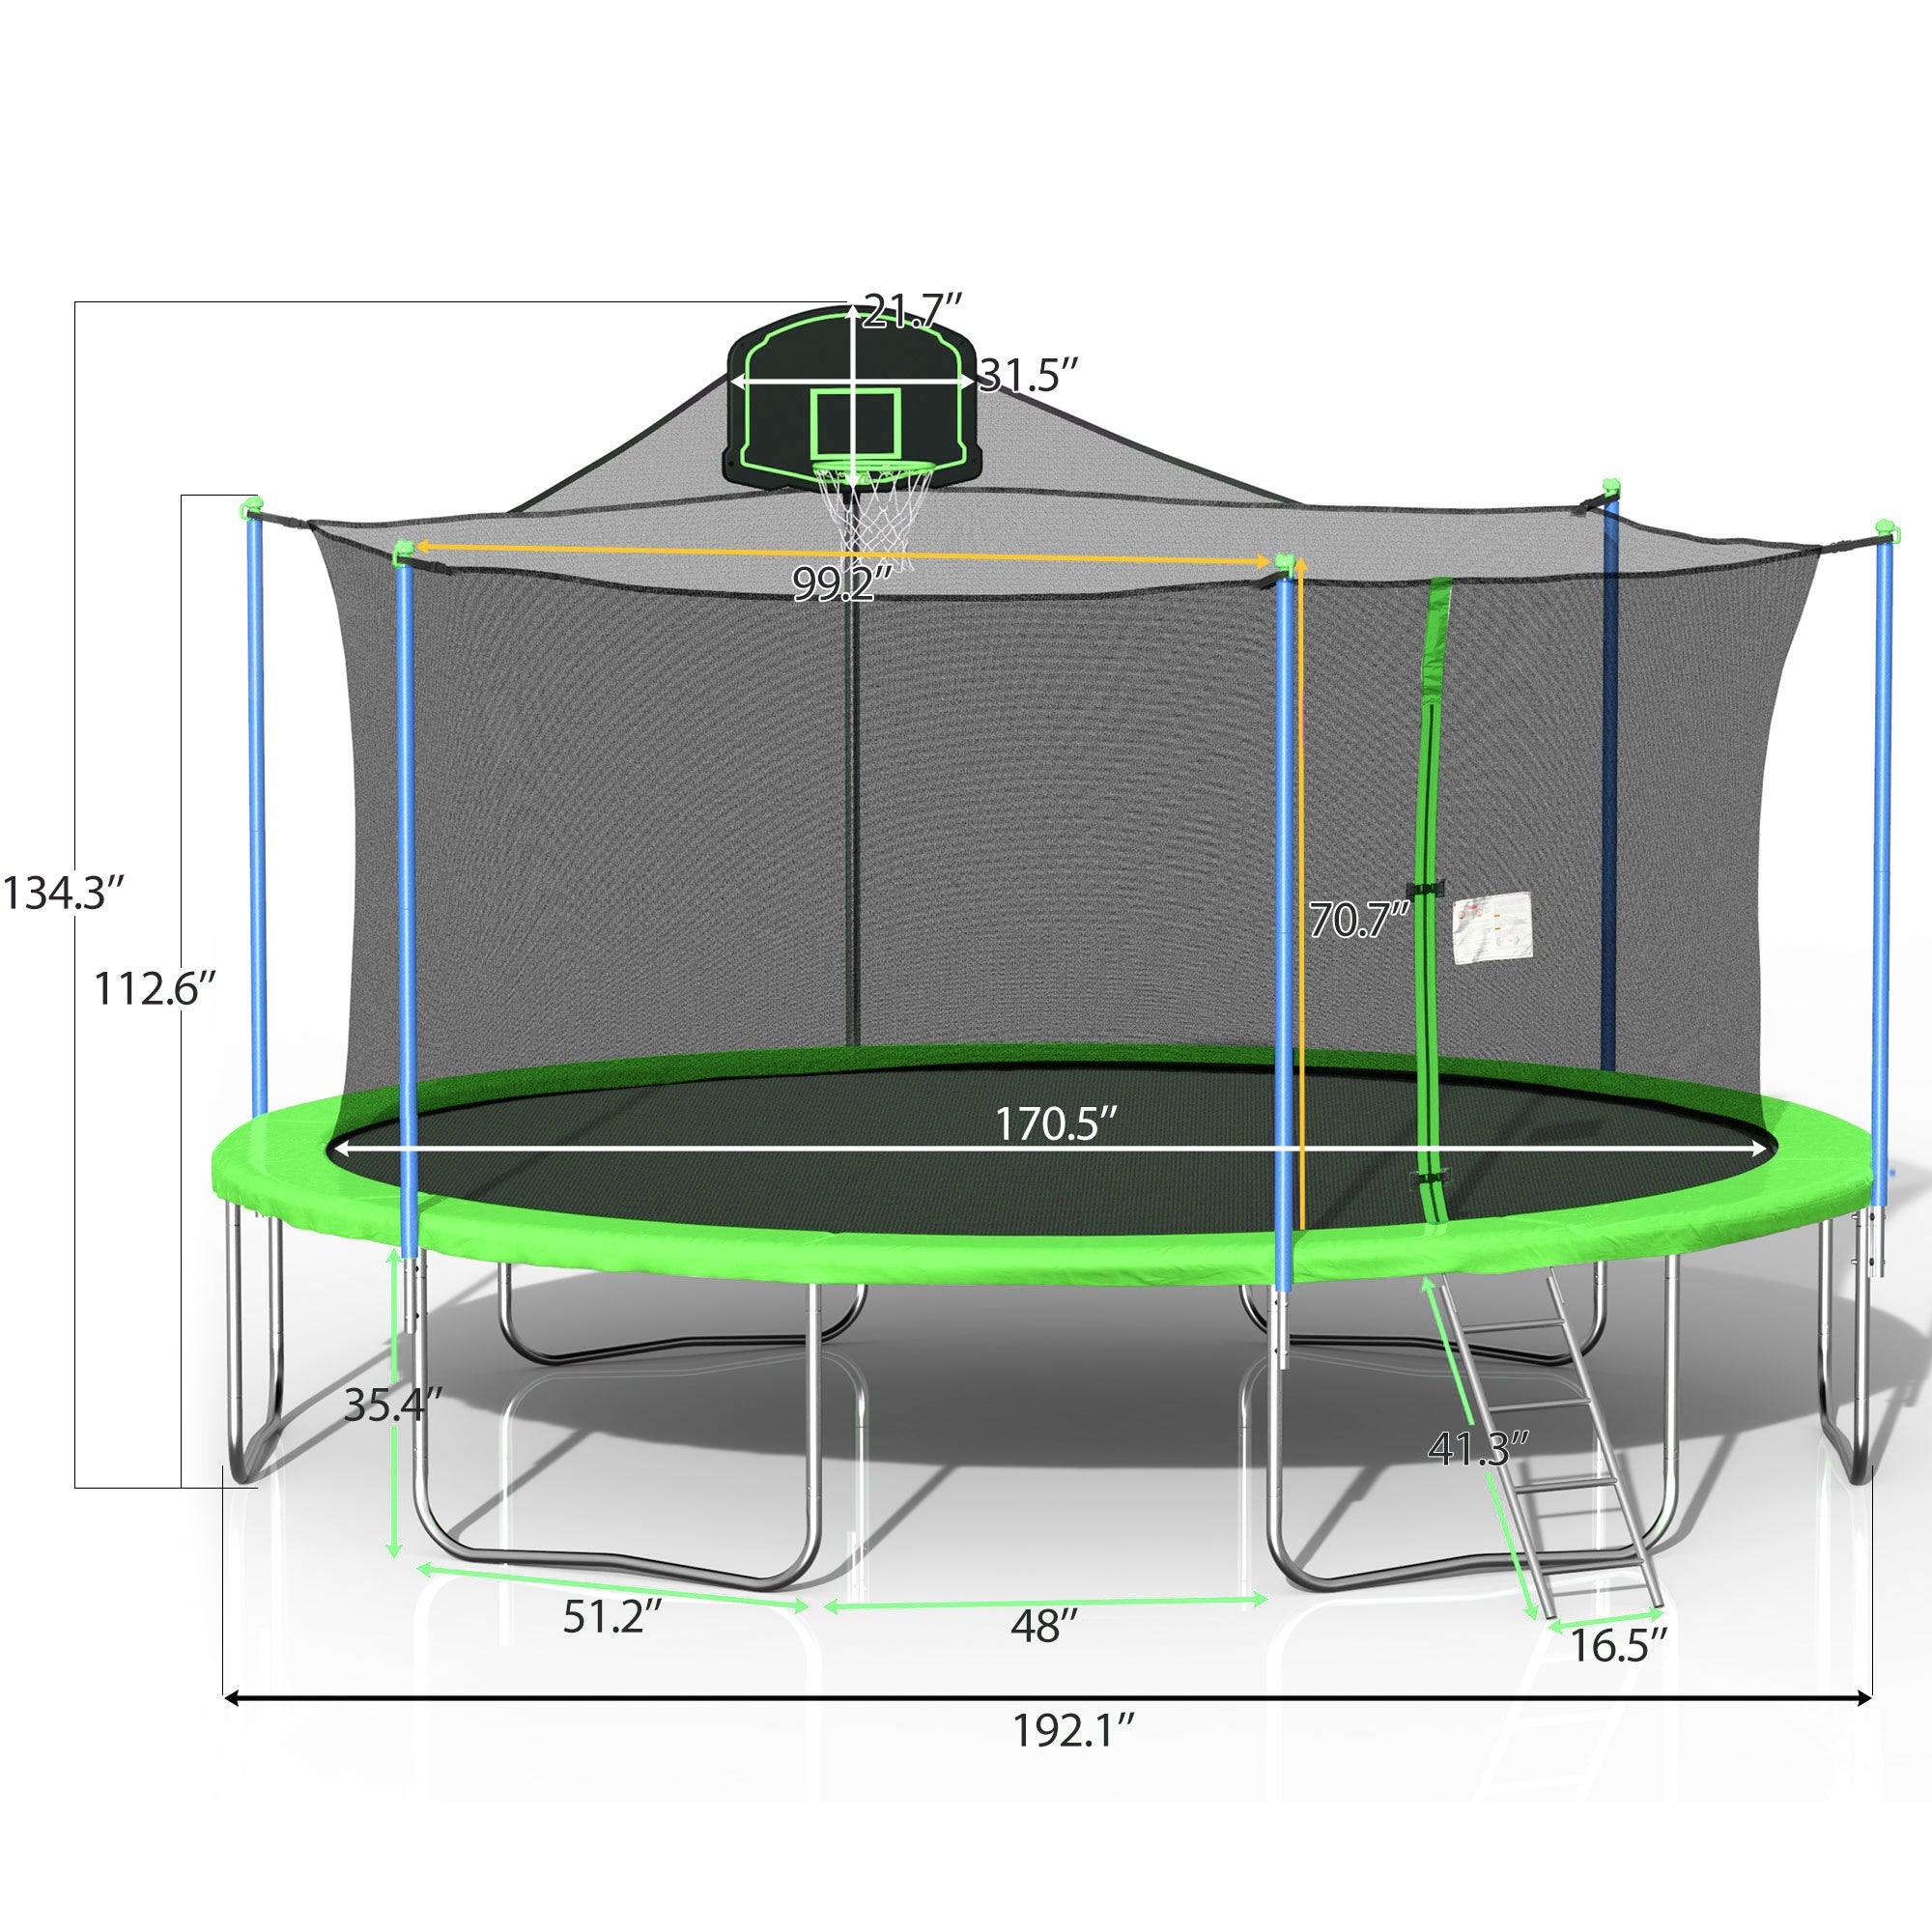 Pro Outdoor Trampoline with Basketball Hoop 16FT, Green